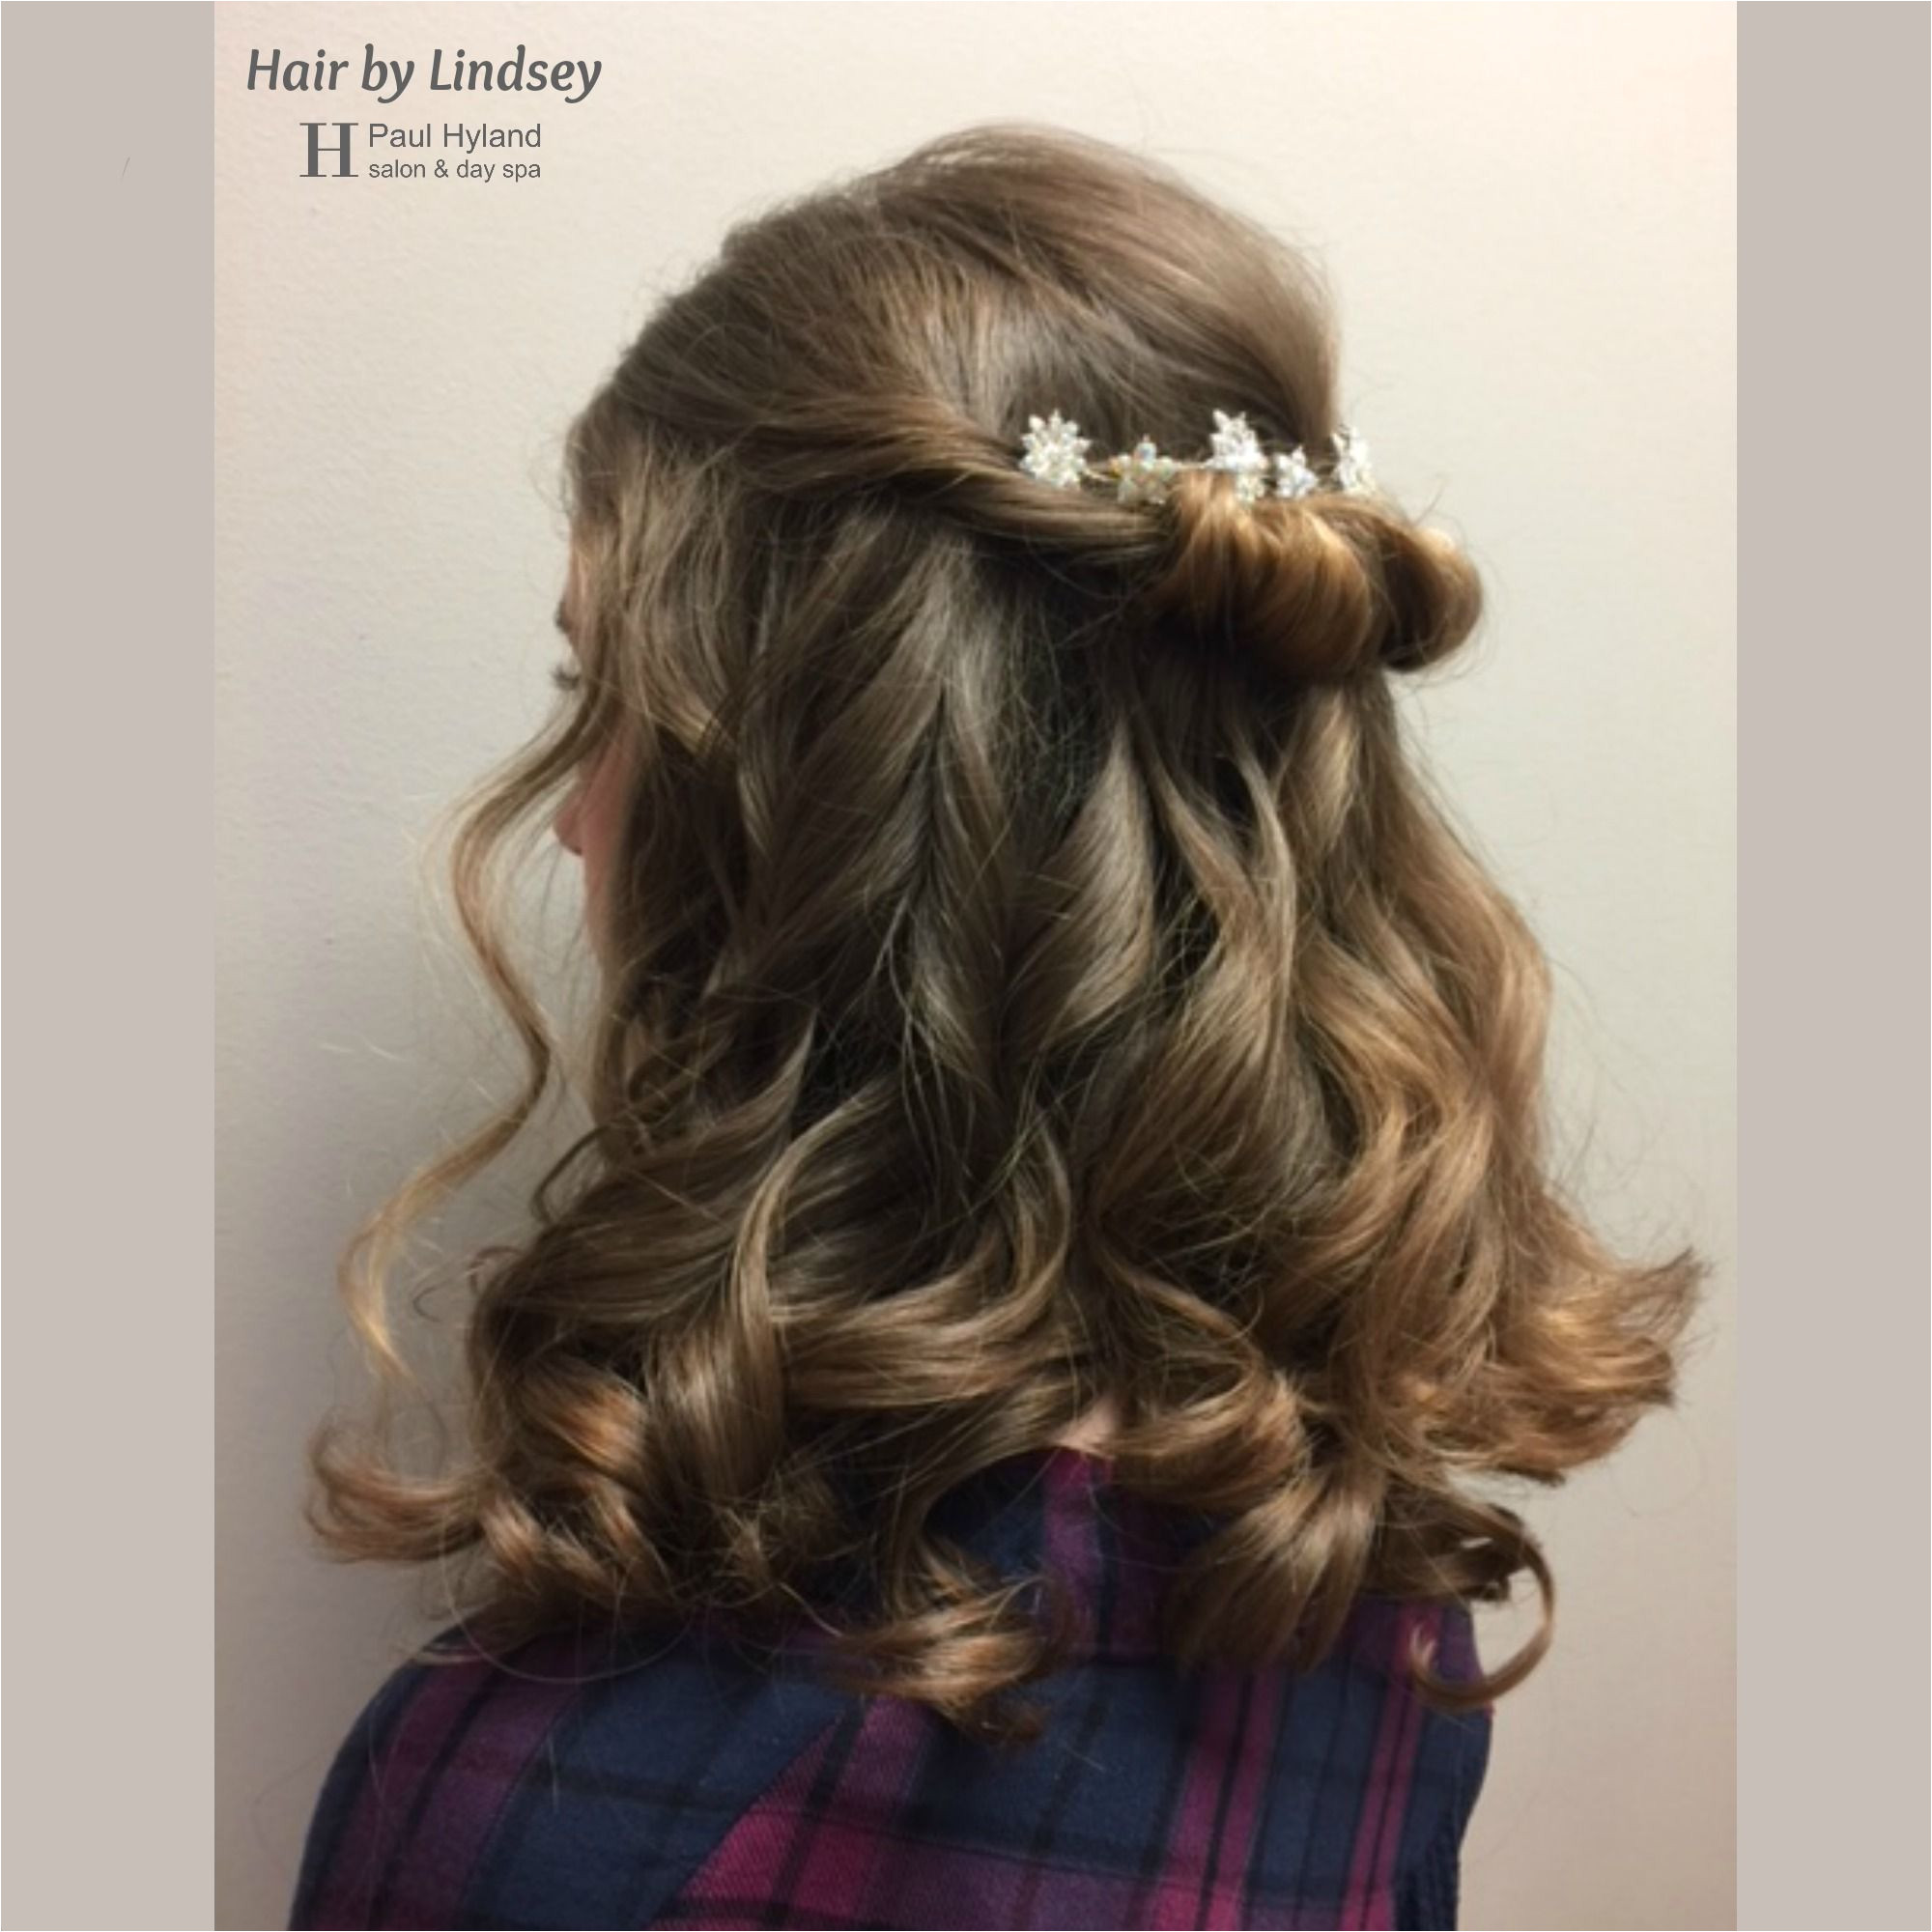 Pretty down style for wedding prom or other special occasions Hair by Lindsey